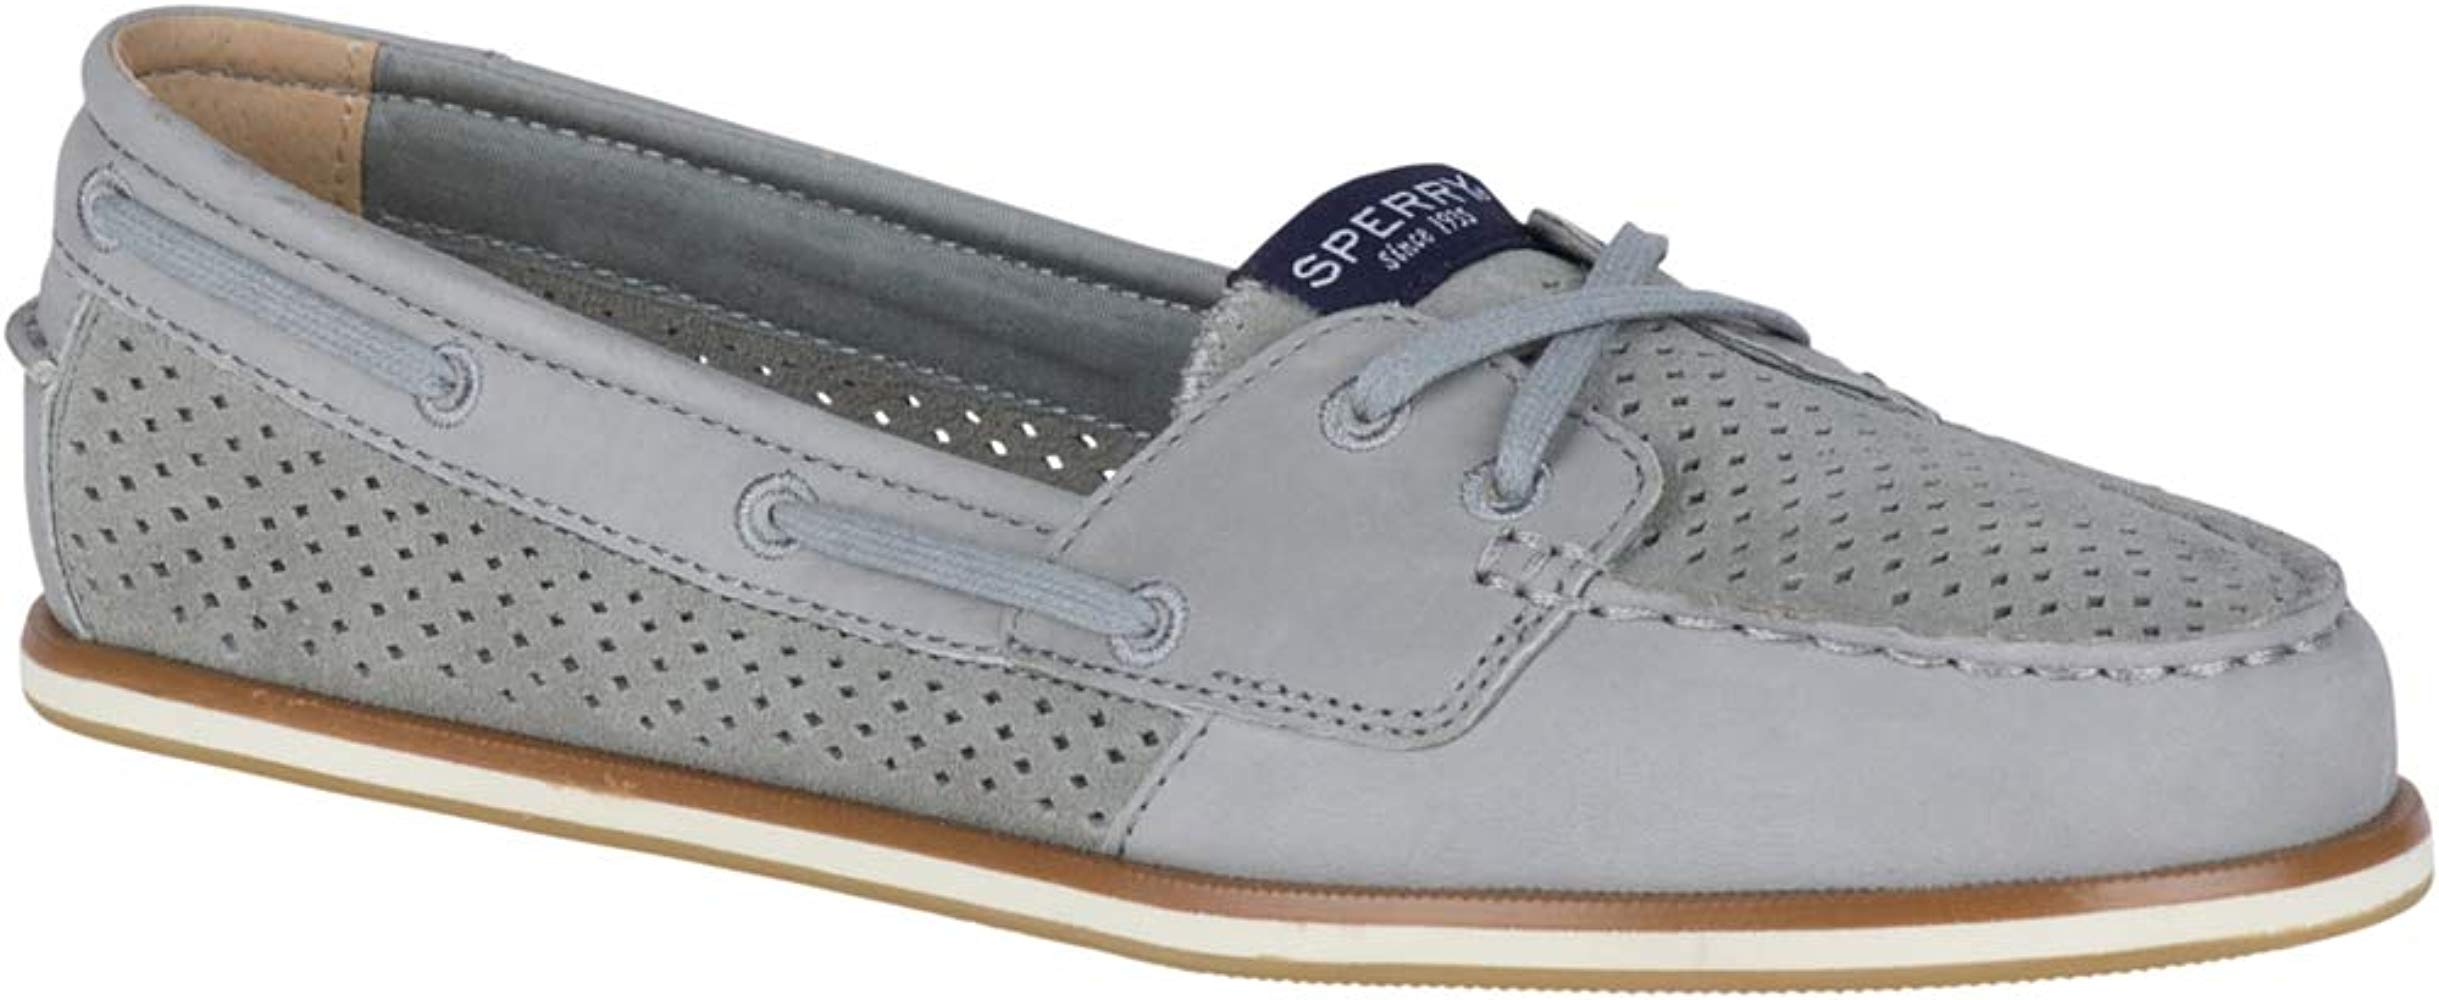 Sperry Top-Sider Womens Strand Key Perforated Boat Shoes